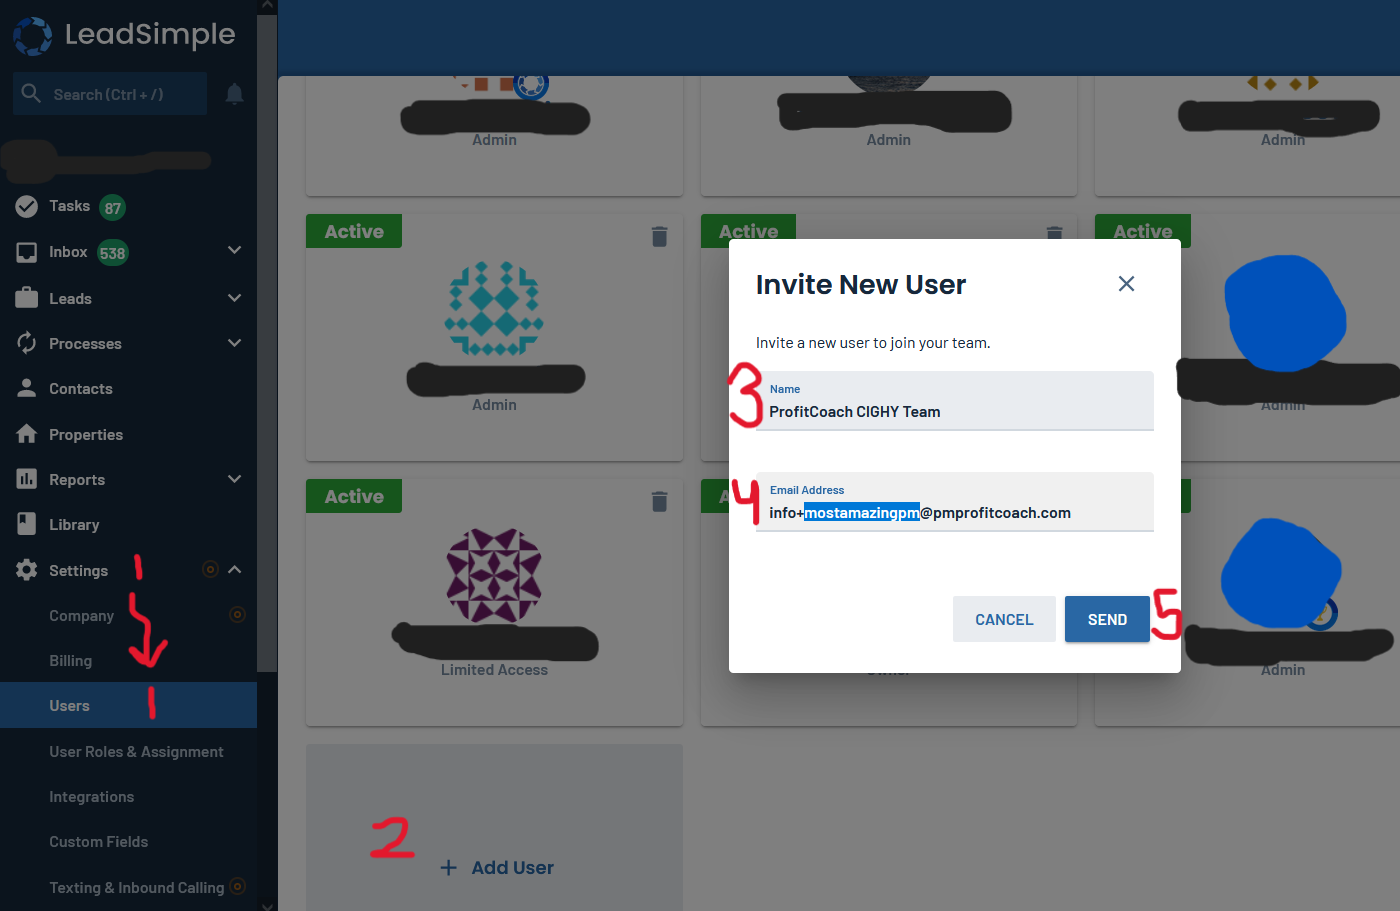 How to add a user in LeadSimple